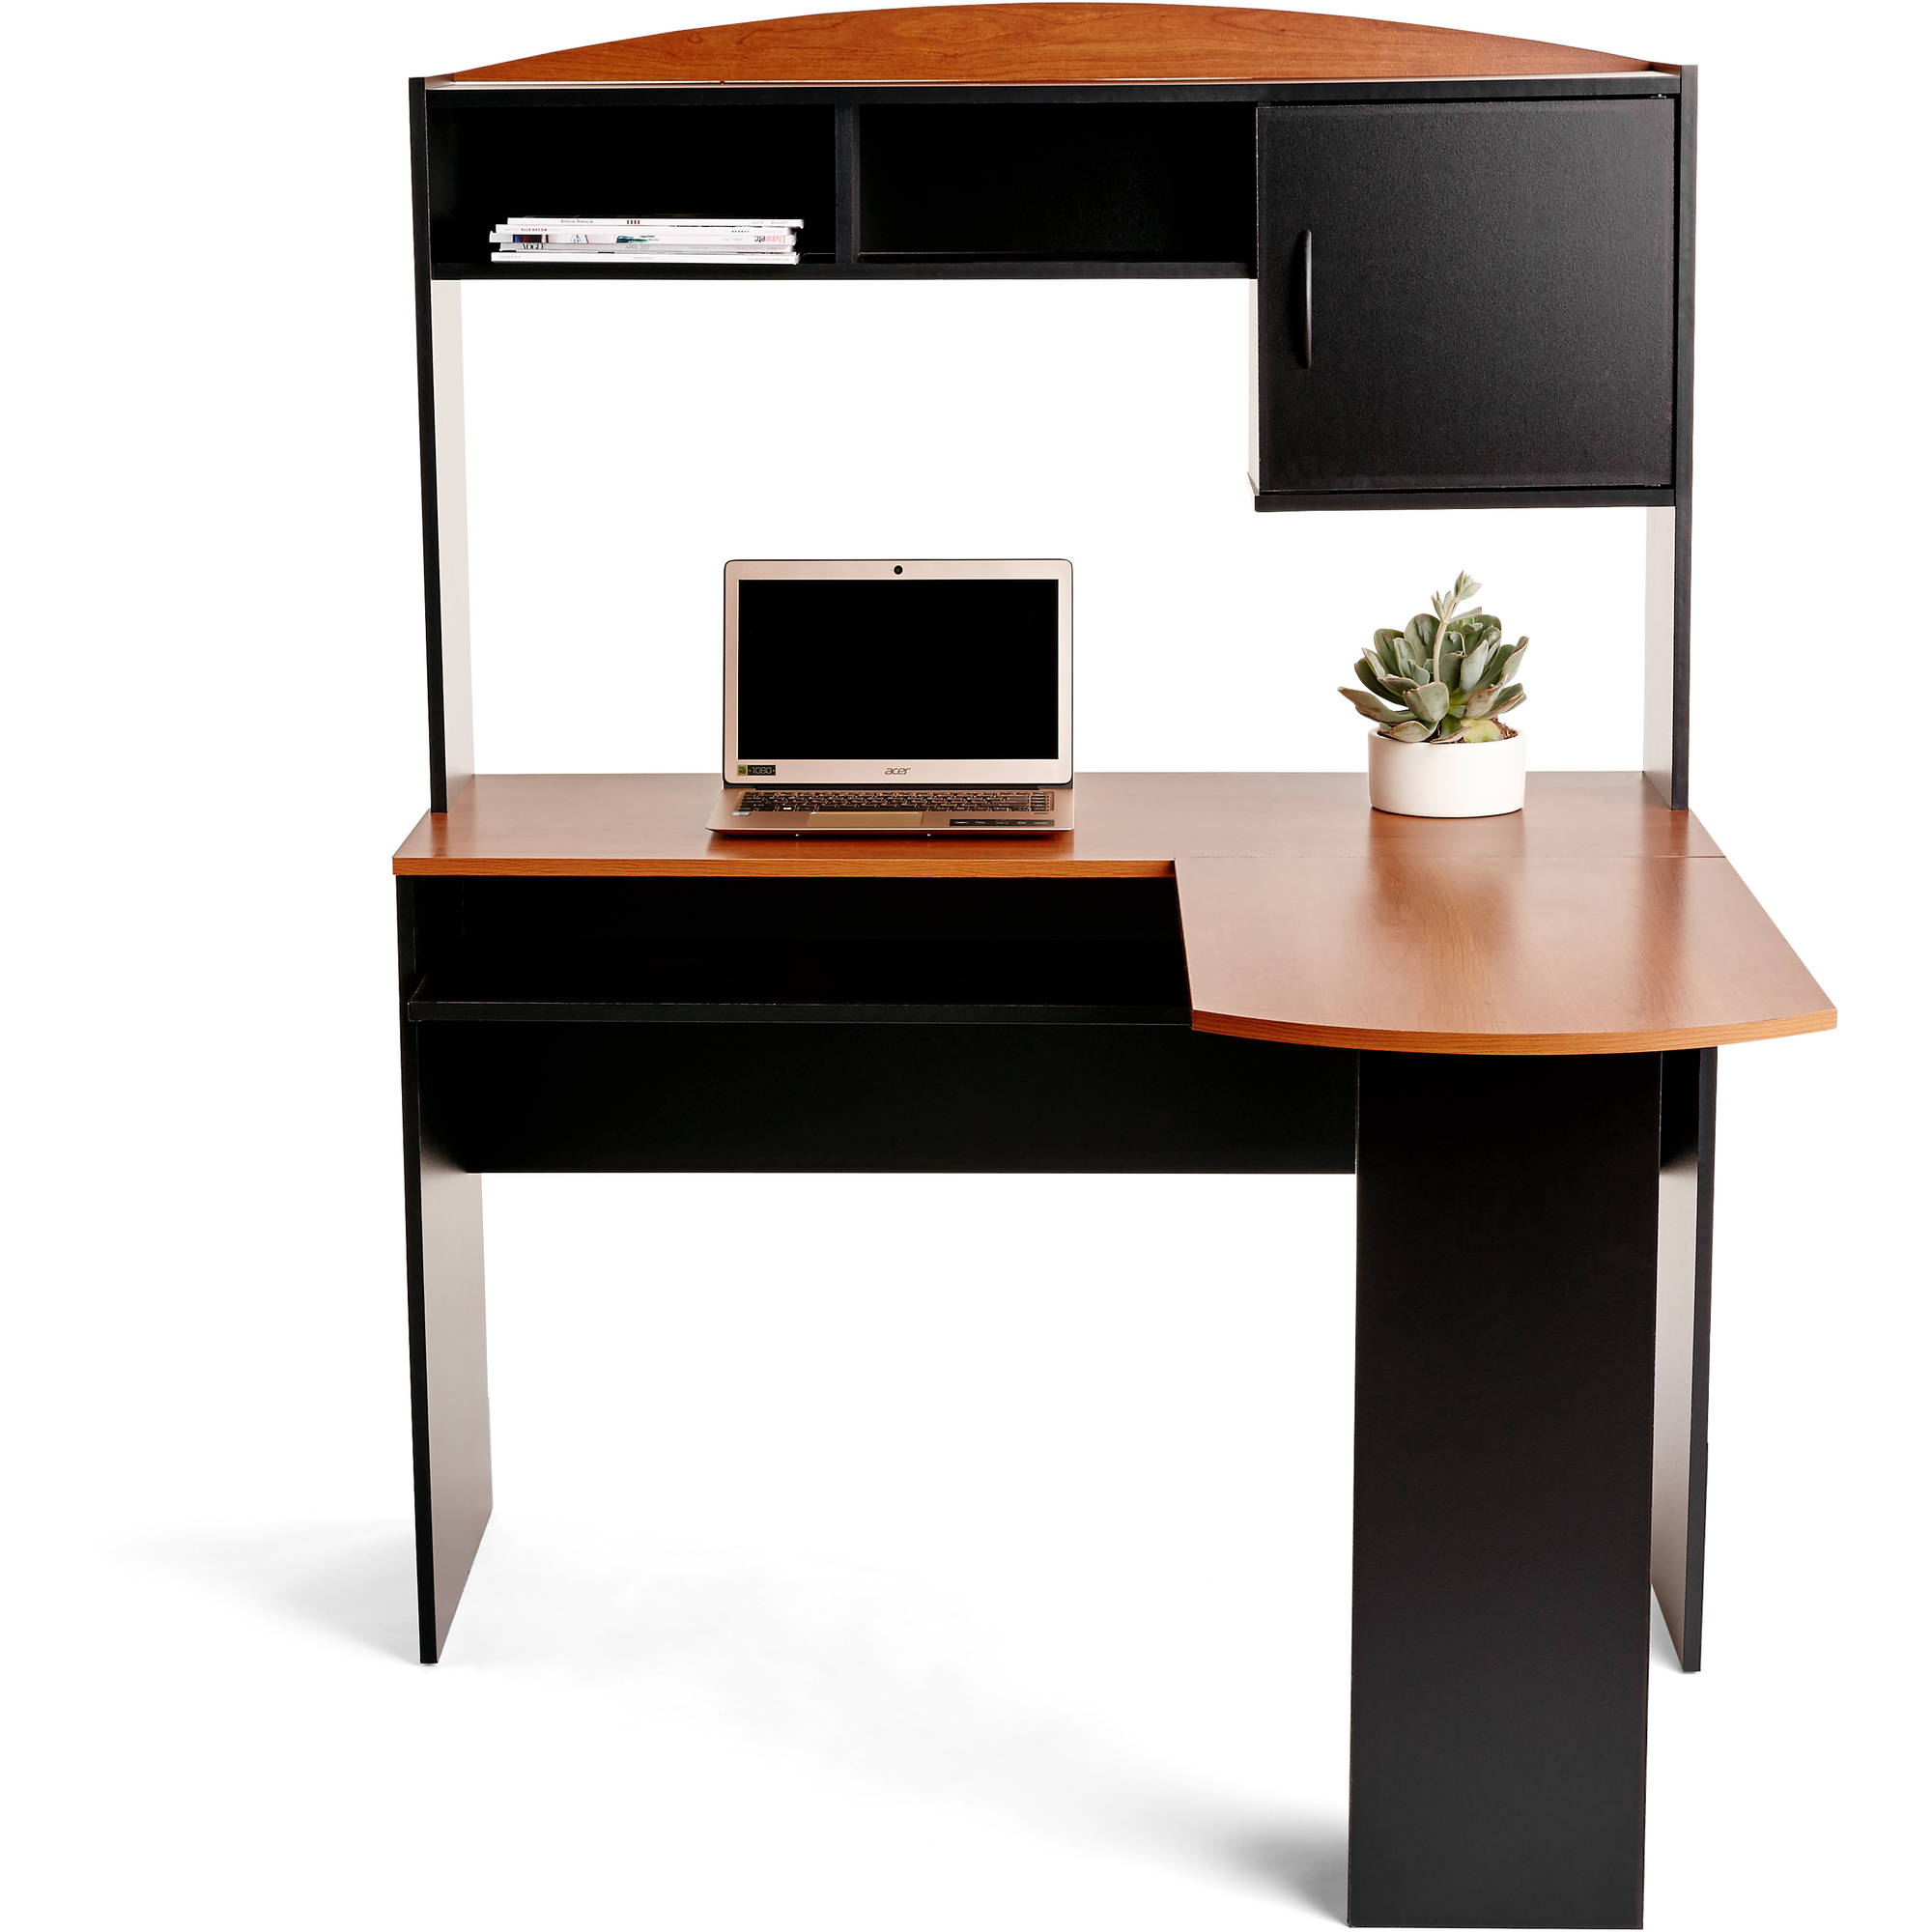 L shaped desk mainstays l-shaped desk with hutch, multiple finishes BANMOYT